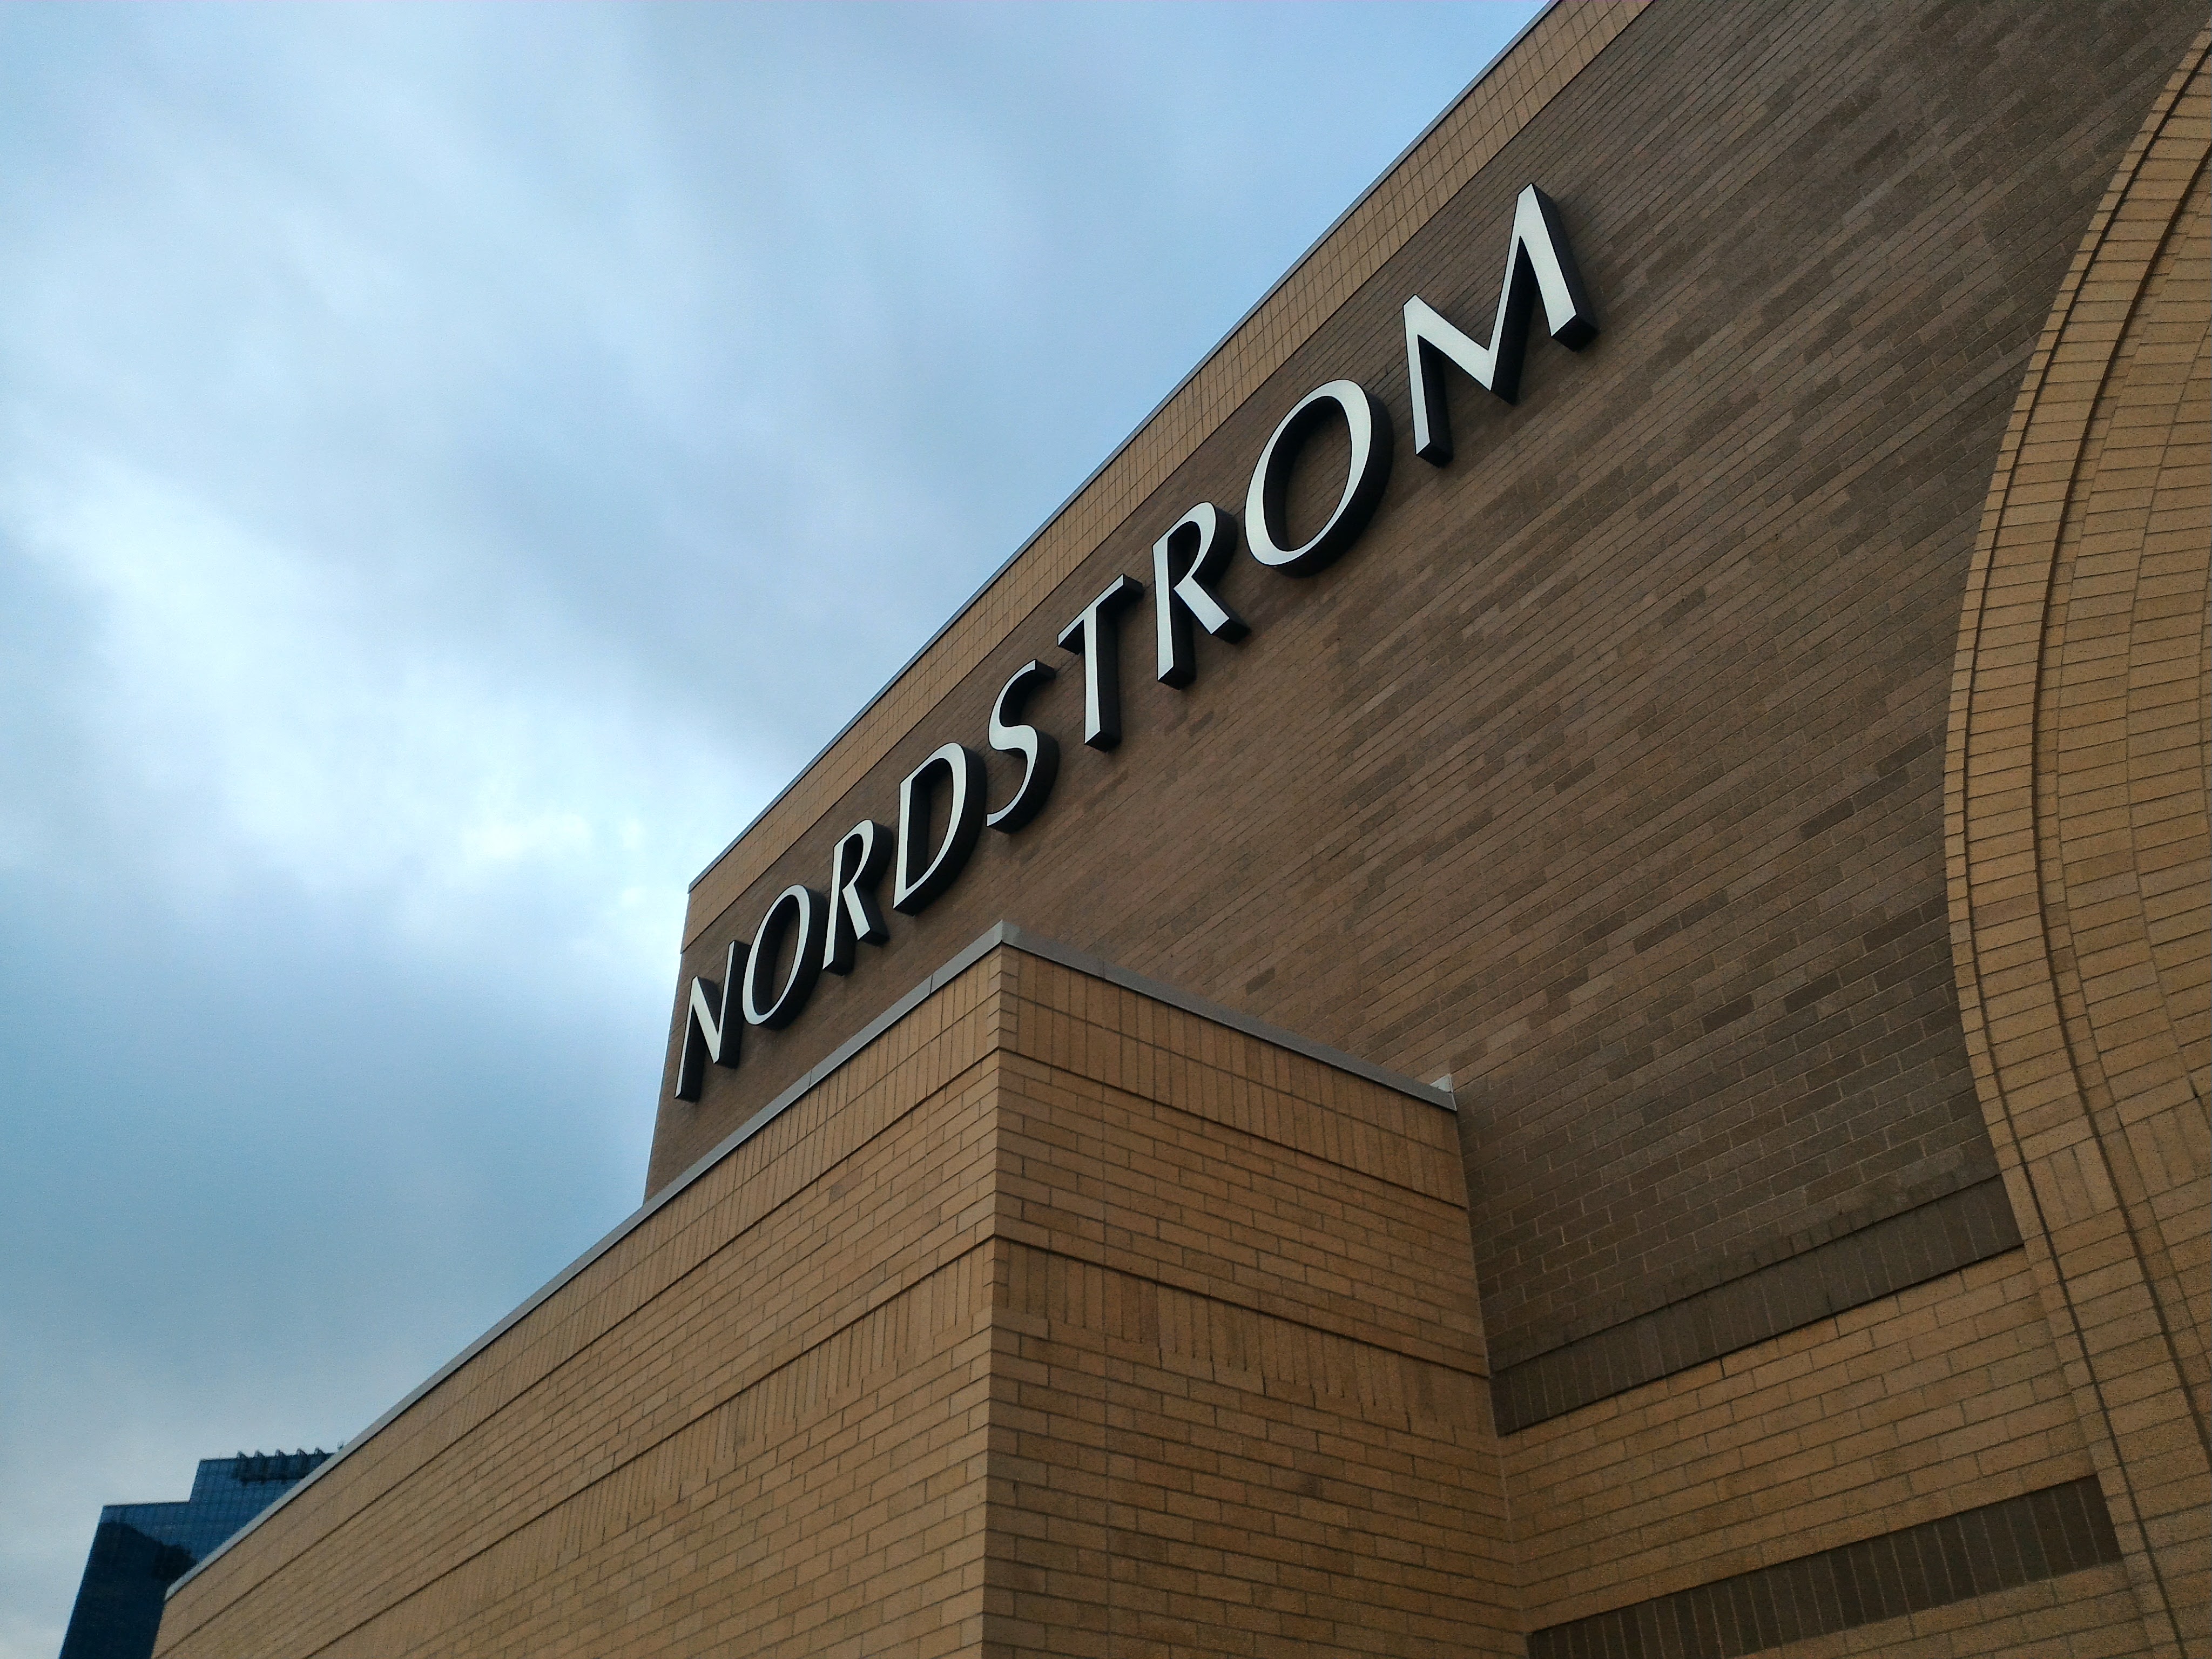 Aldo at Woodfield Mall in Schaumburg, Illinois! The Best Woodfield Mall  Stores in Schaumburg Illinois. Woodfield Mall is one of the biggest malls  in America, let me help you decide where to